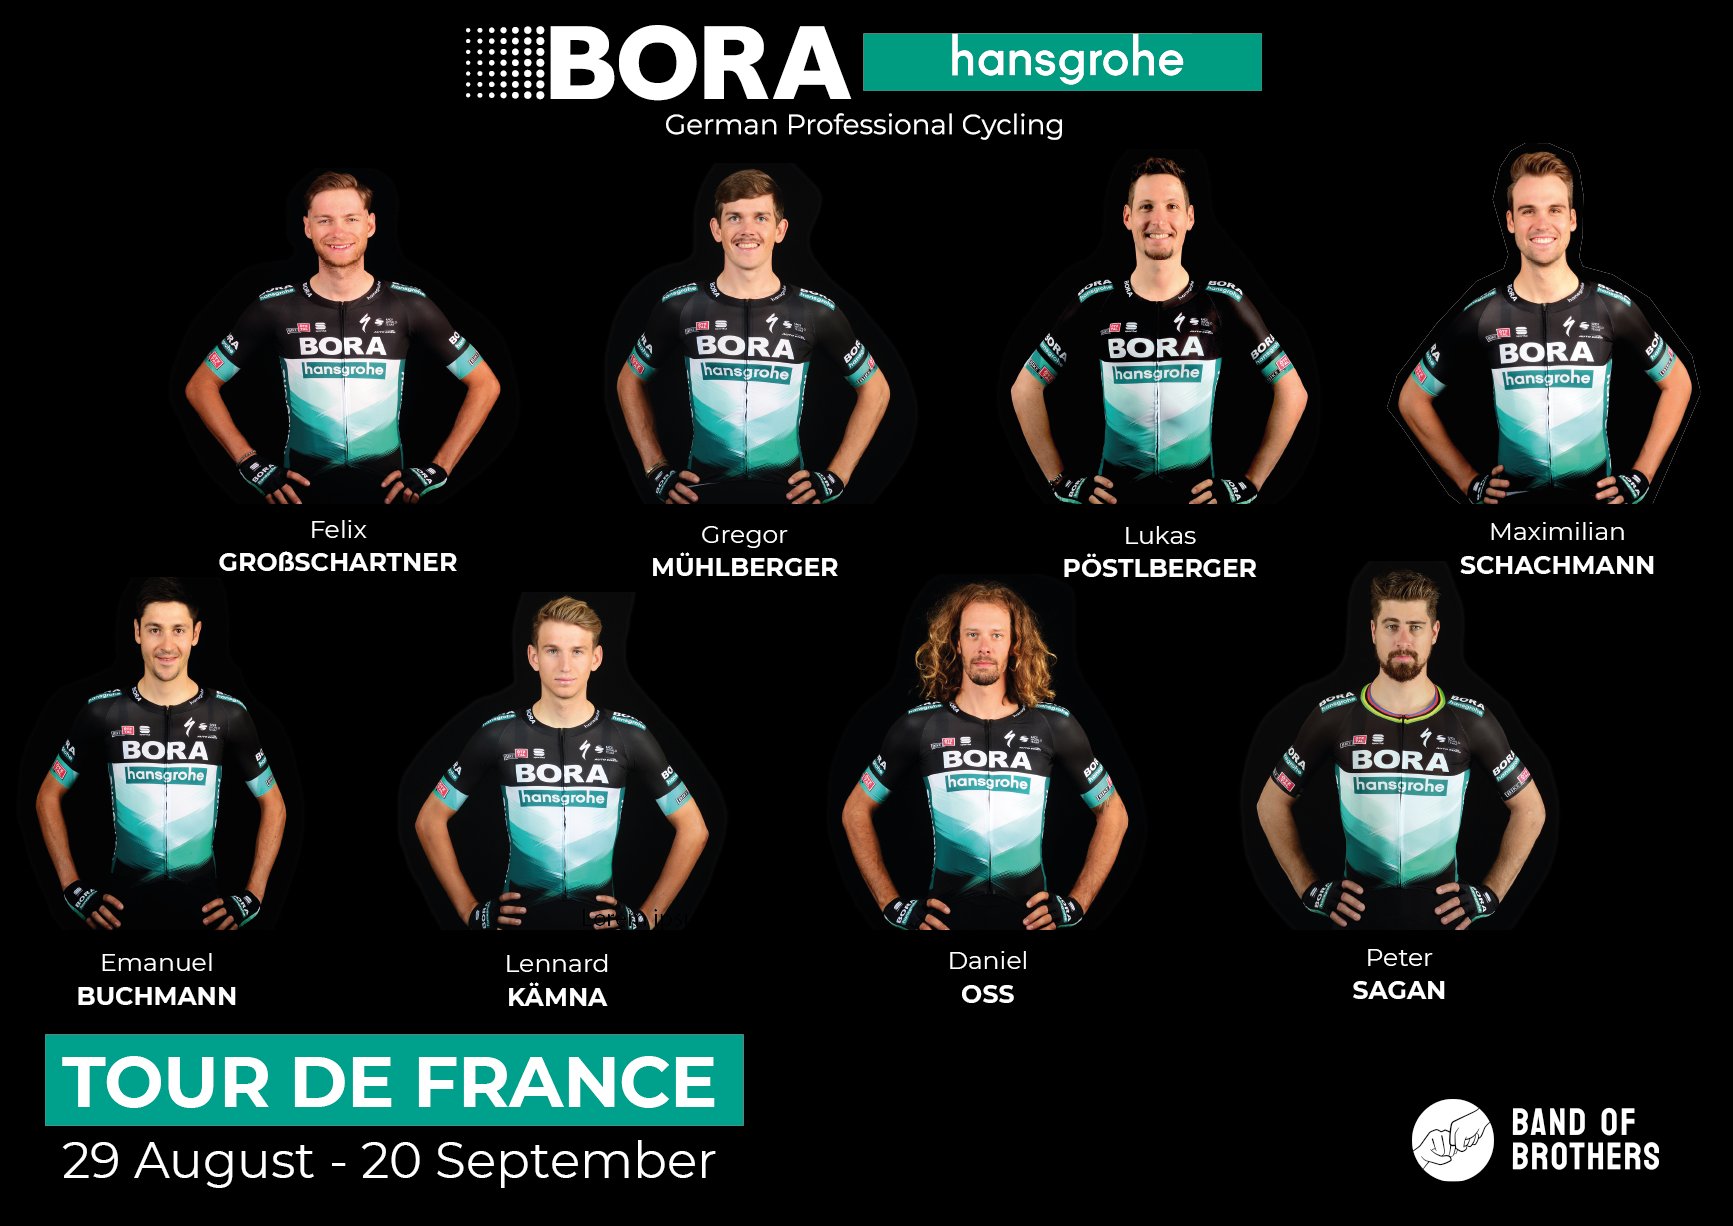 BORA – hansgrohe on Twitter: "TDF UPDATE: BORA – hansgrohe's @LeTour team  remains unchanged. Read our medical update on @EmuBuchmann @MaxSchachmann  &amp; @muehlberger_94 here: https://t.co/0YaEnX72XC  https://t.co/vzsI1rurqN" / Twitter